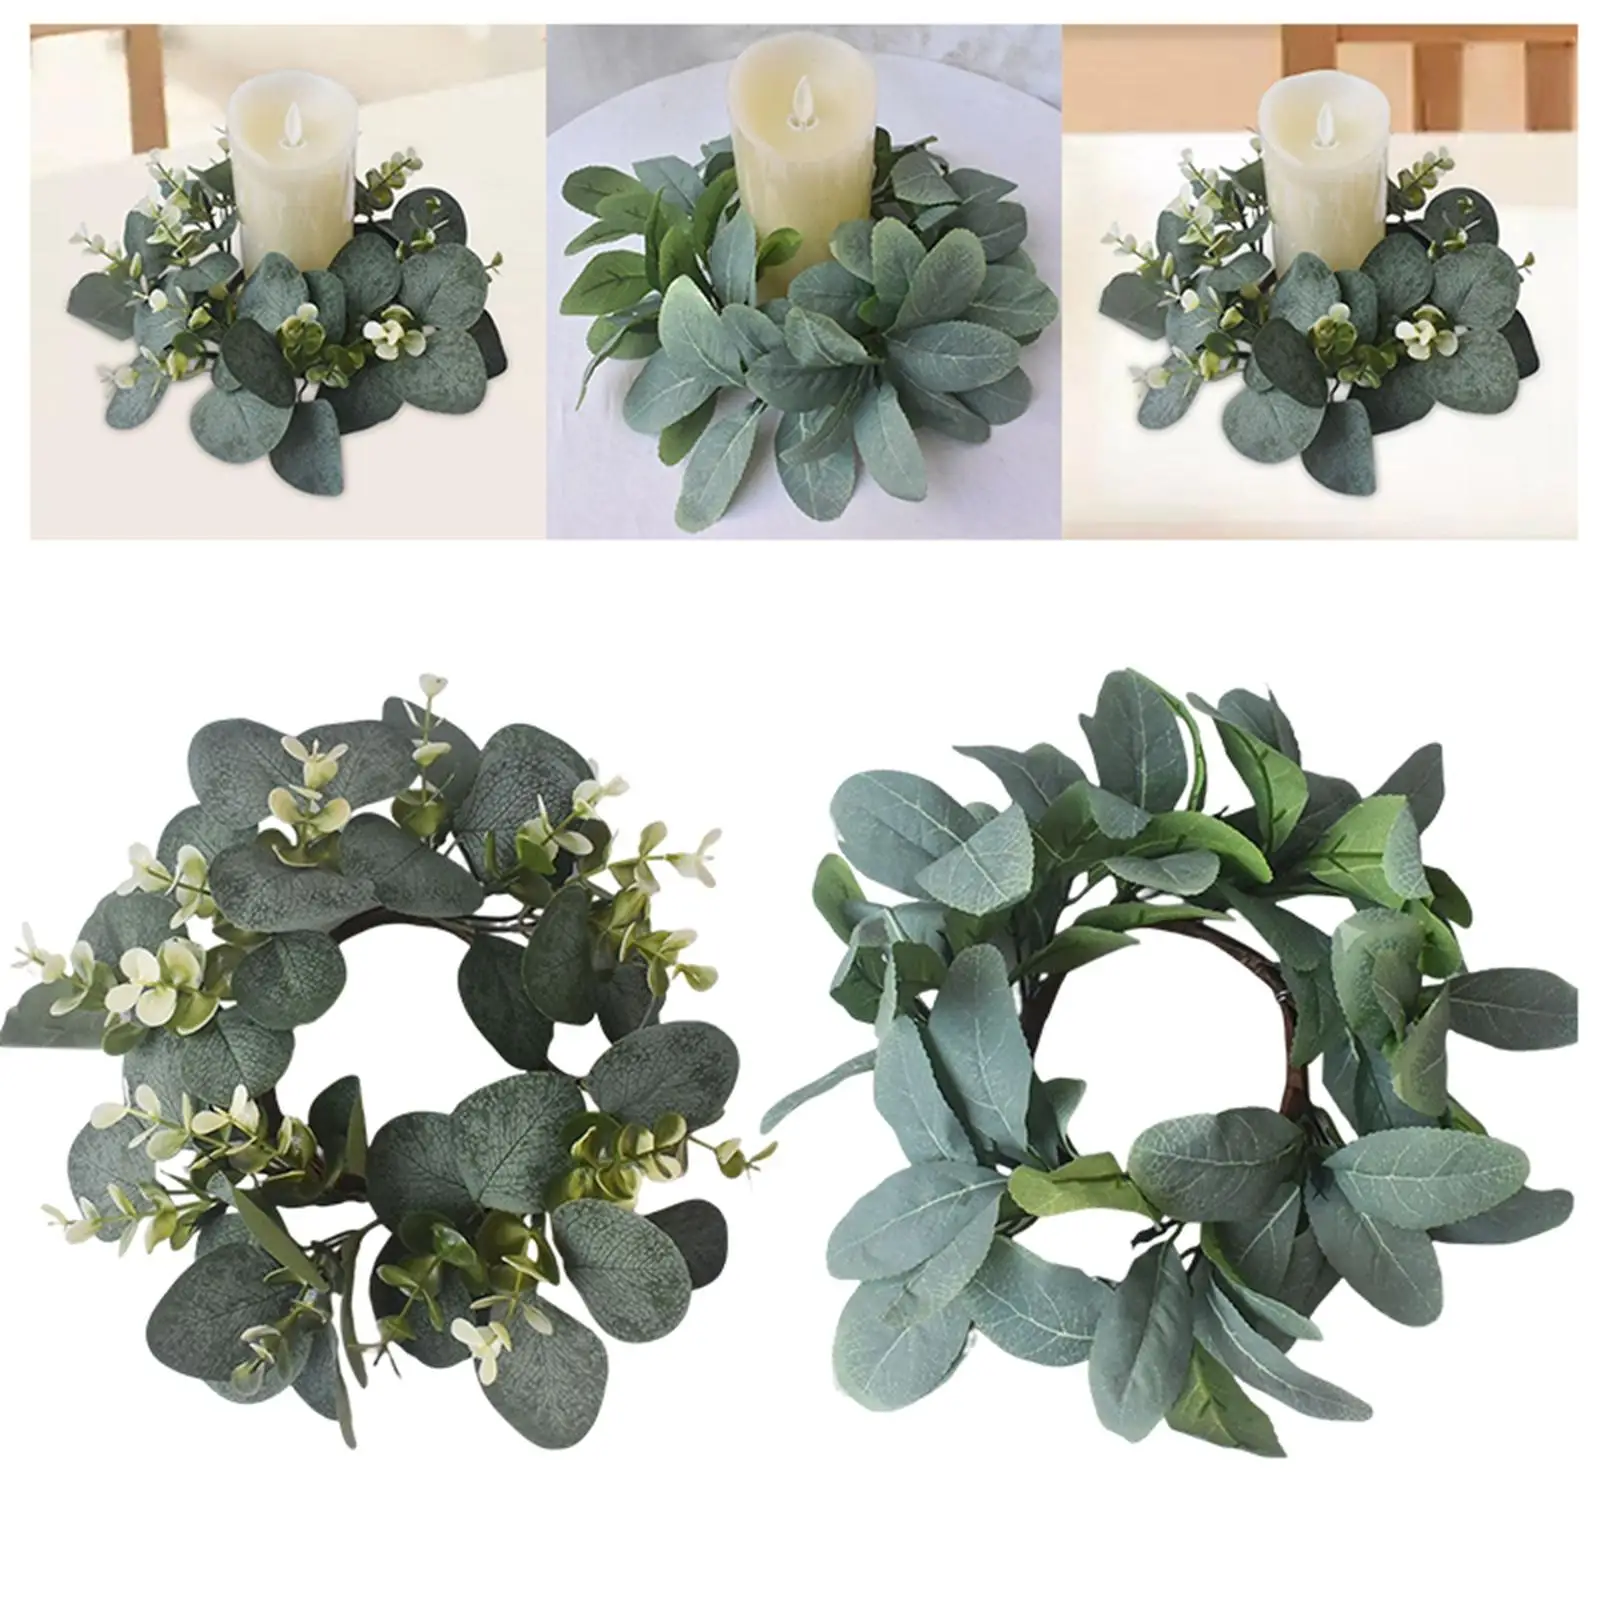 Candle Ring Wreaths Centerpieces Green Wreath Beautiful Floral Hoop Hanging for Front Door Window Porch Spring Summer Decoration